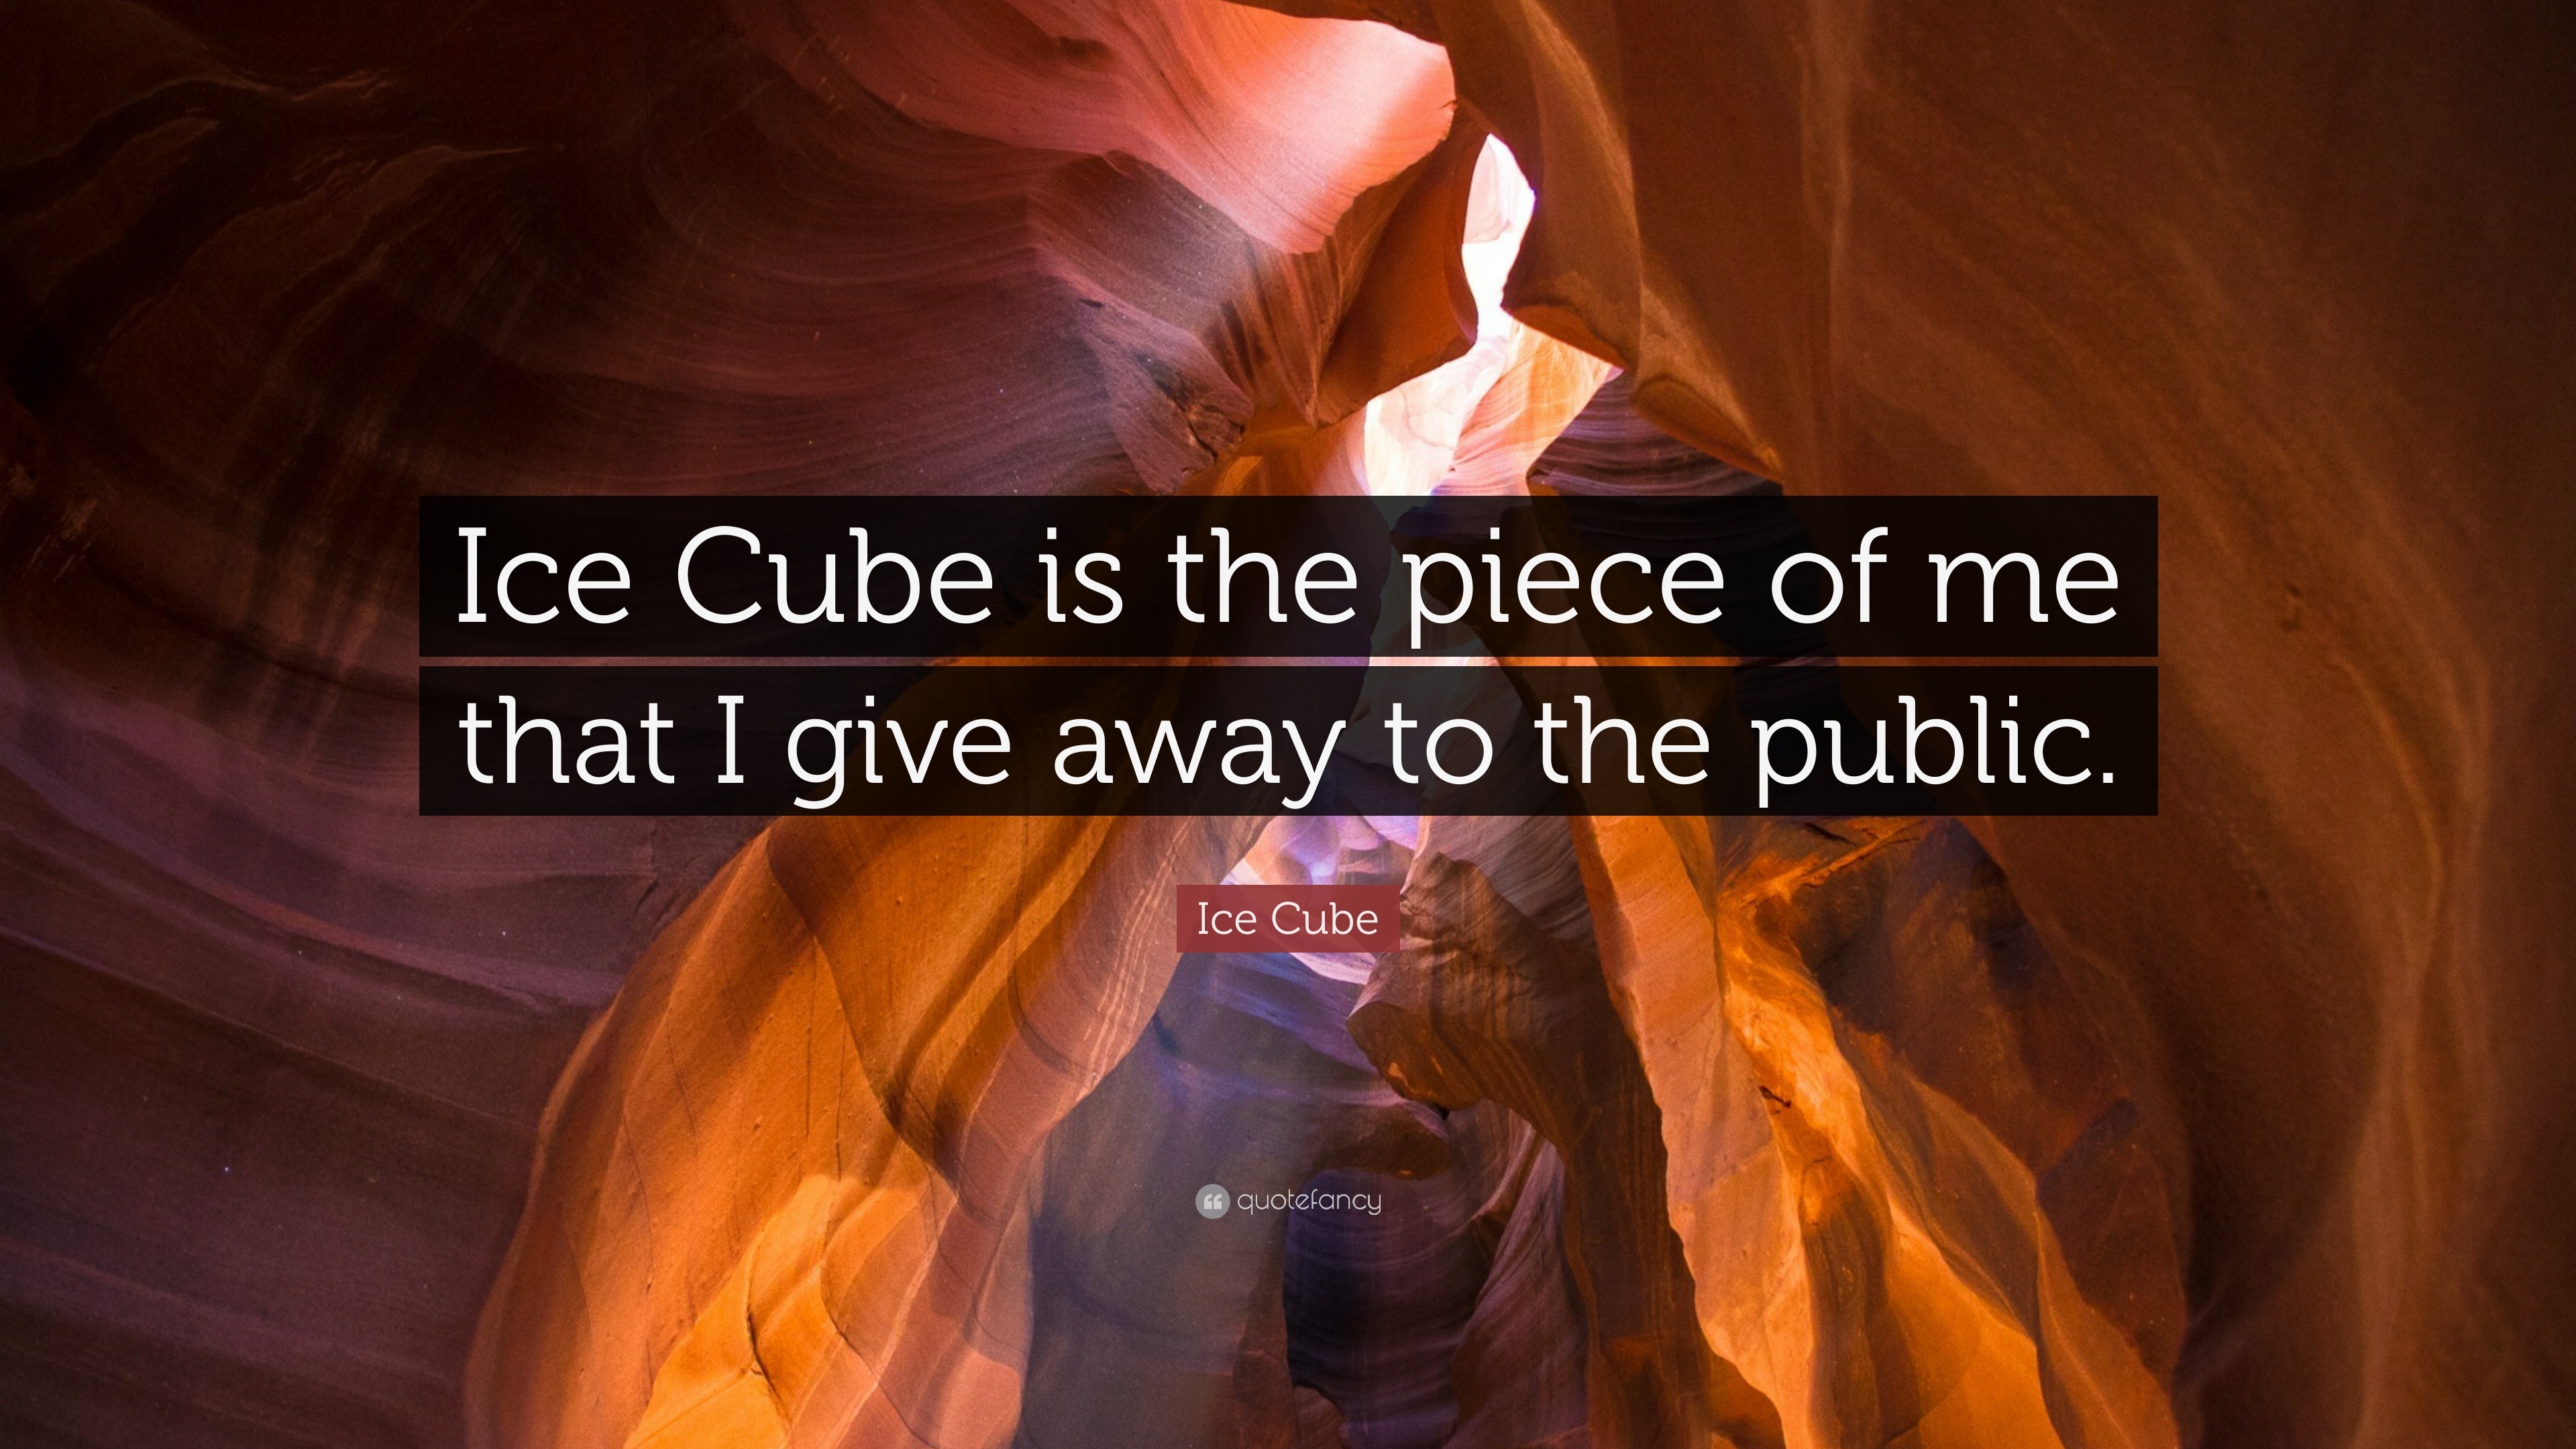 Ice Cube Quote Ice Cube Is The Piece Of Me That I Give Away To The Public